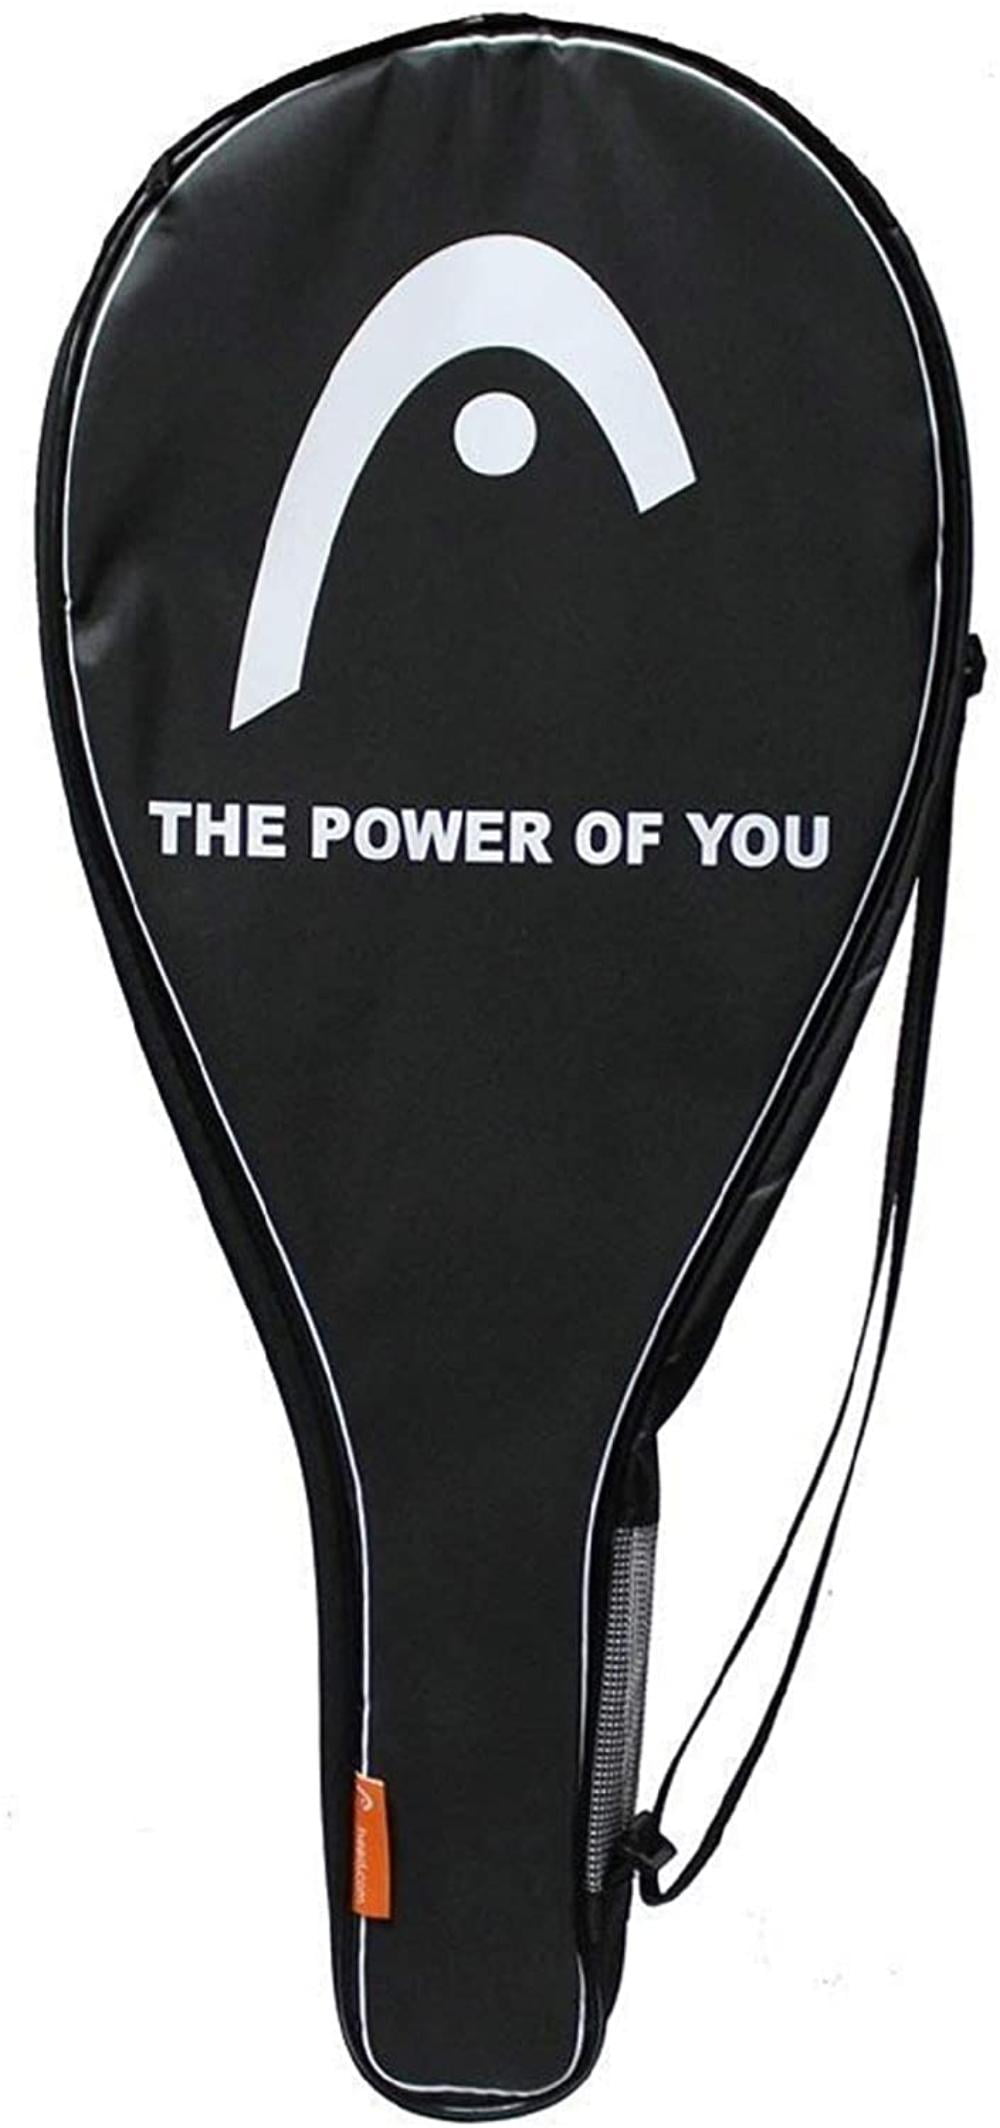 HEAD POWER OF YOU TENNIS RACKET PADDED COVER WITH FULL STRAP. 